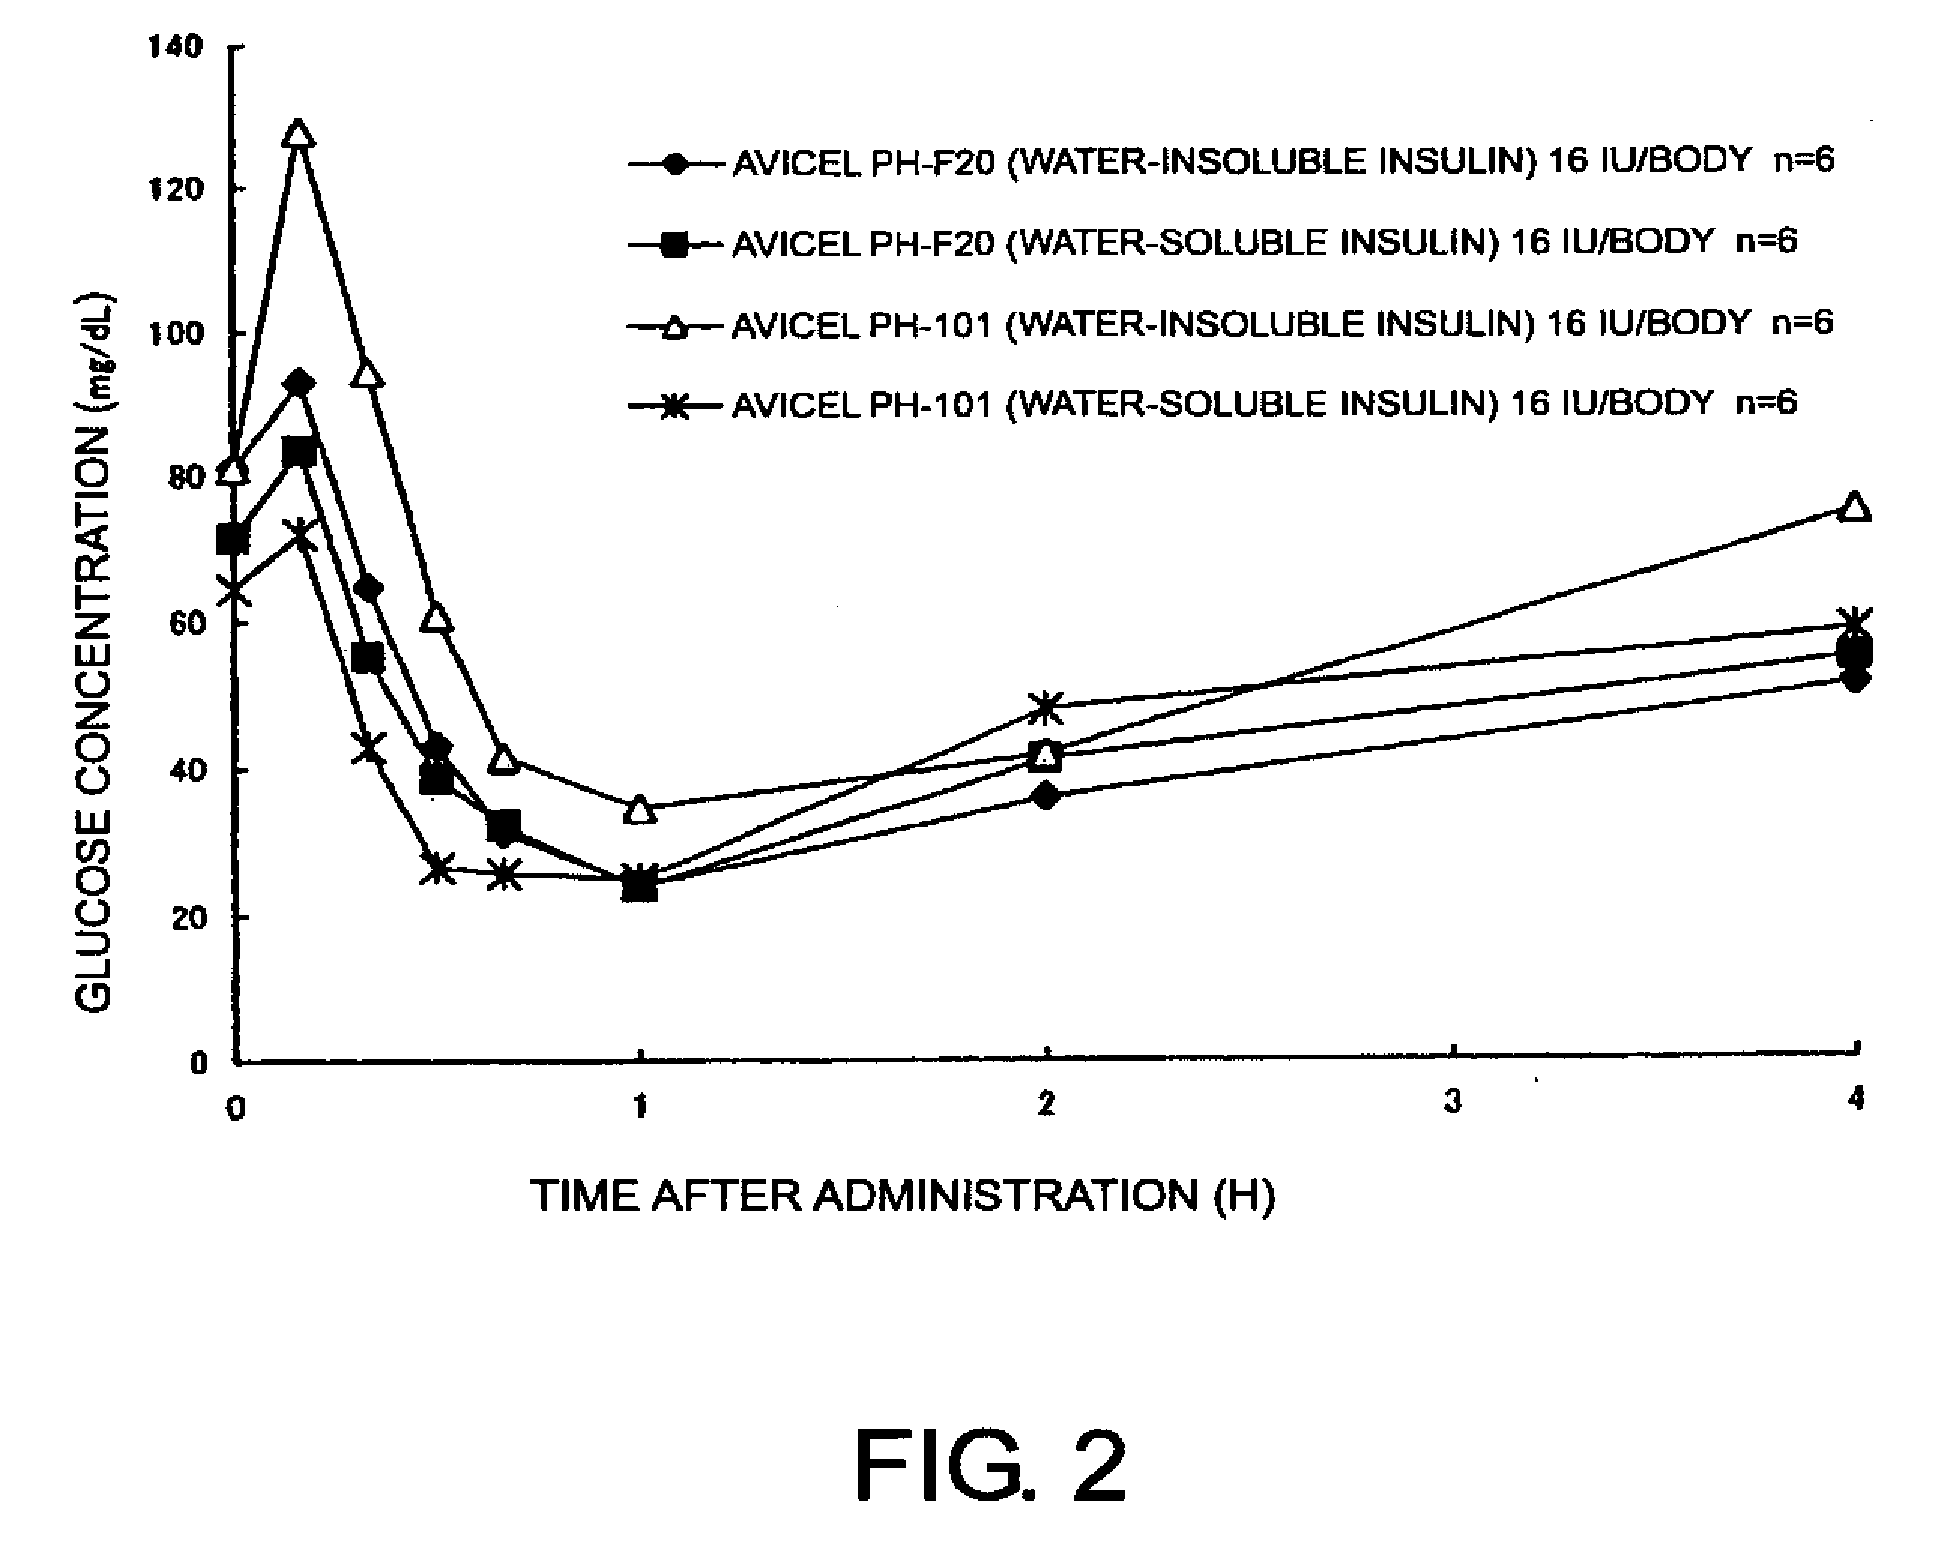 Compositons for nasal administration of pharmaceuticals